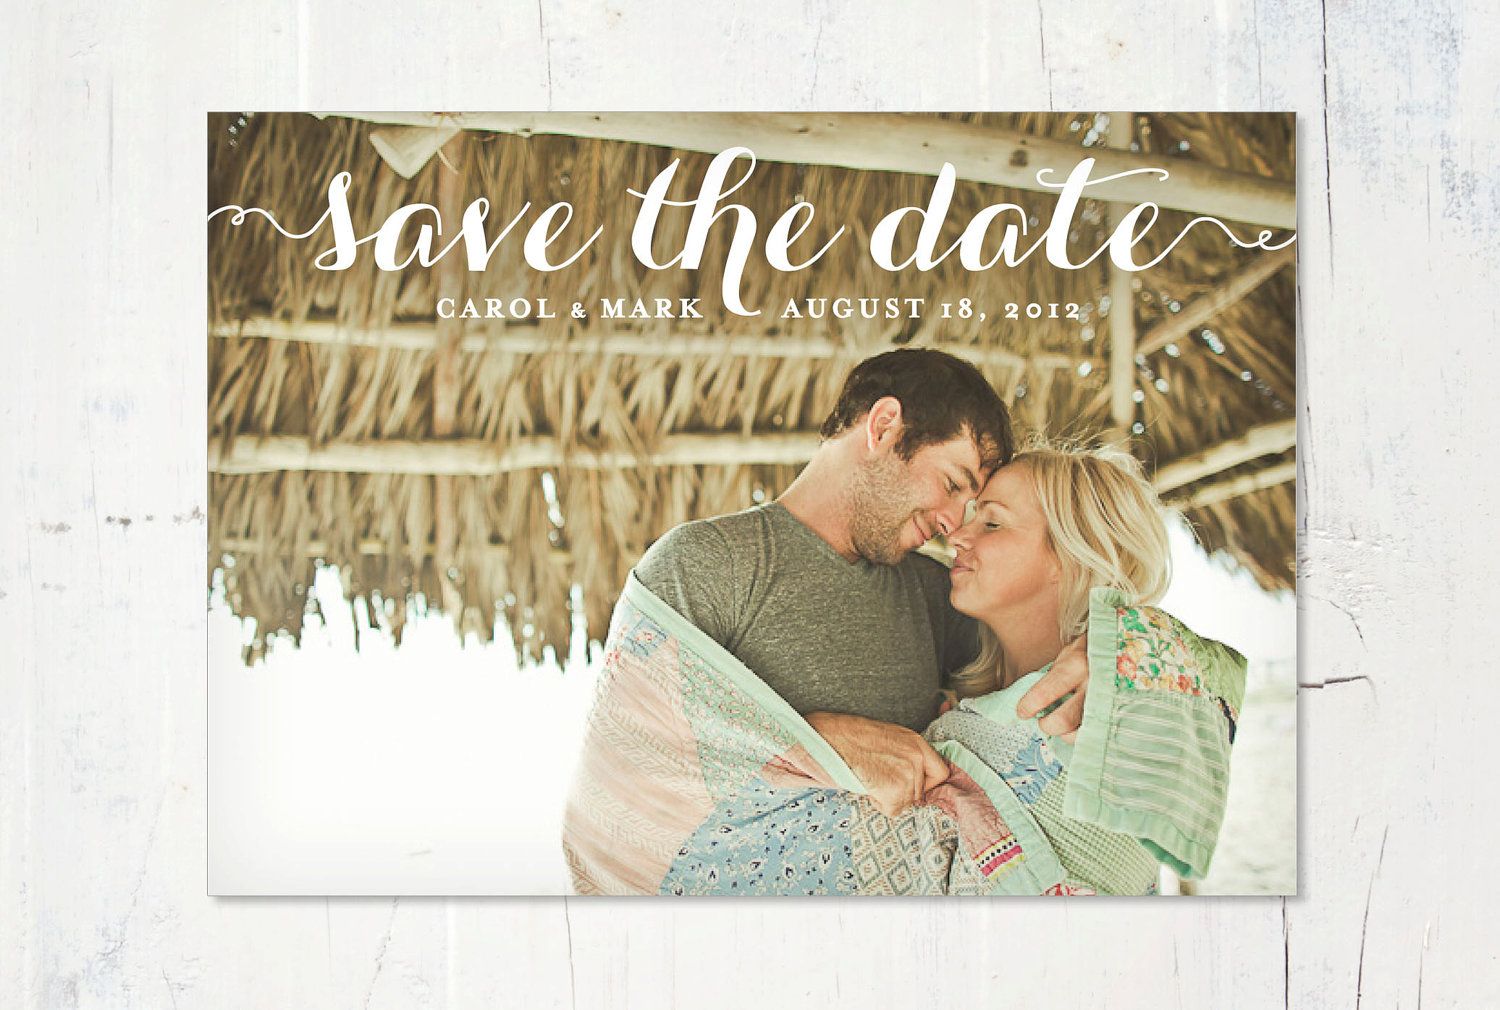 dates figured out yet? Why not create your own snazzy save-the-date ... -   “Save the Date” Ideas